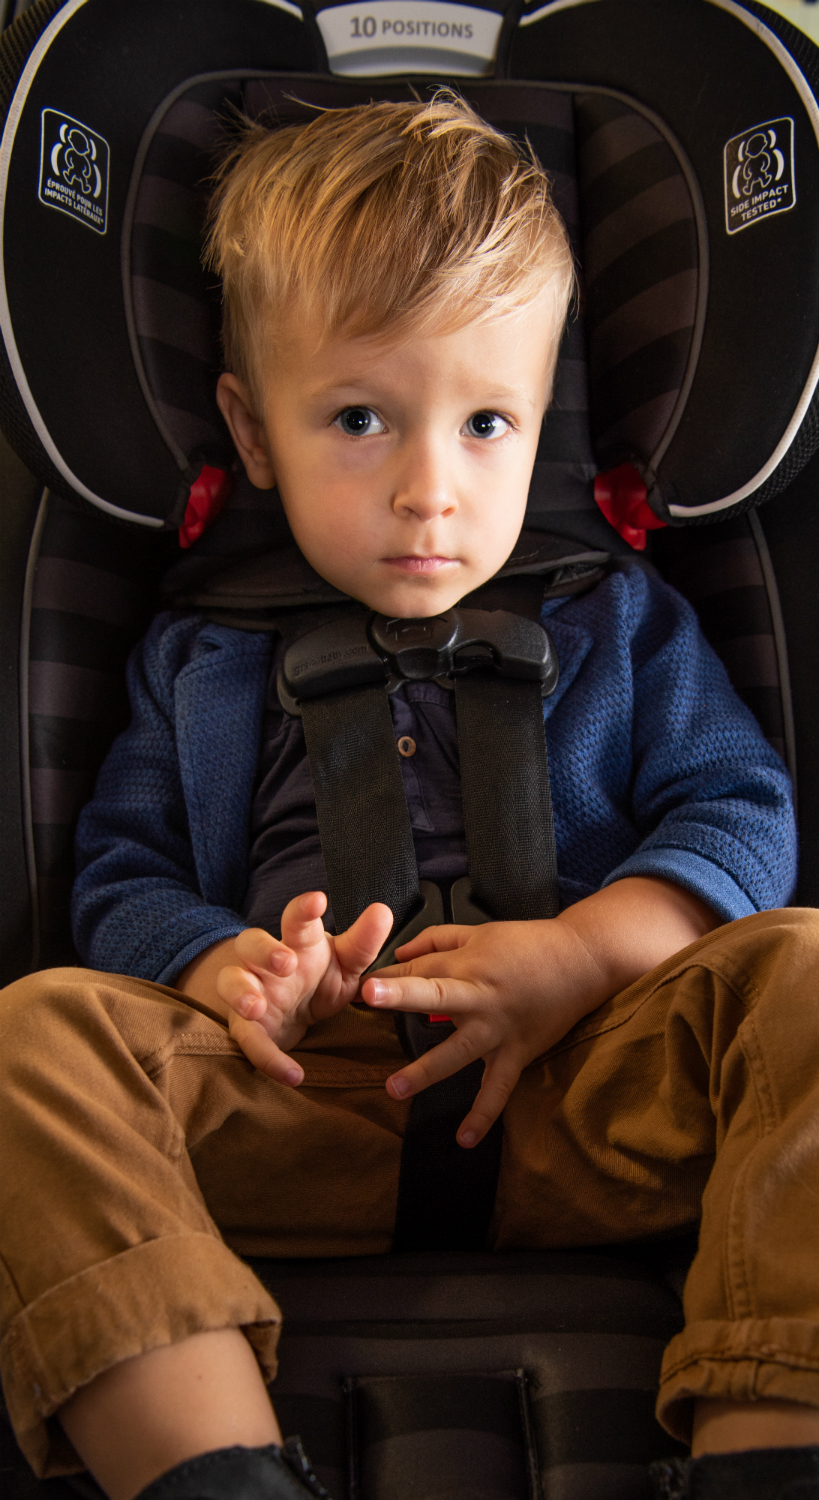 Stage 1 Rear Facing Seats, Infant Car Seat Rules Canada